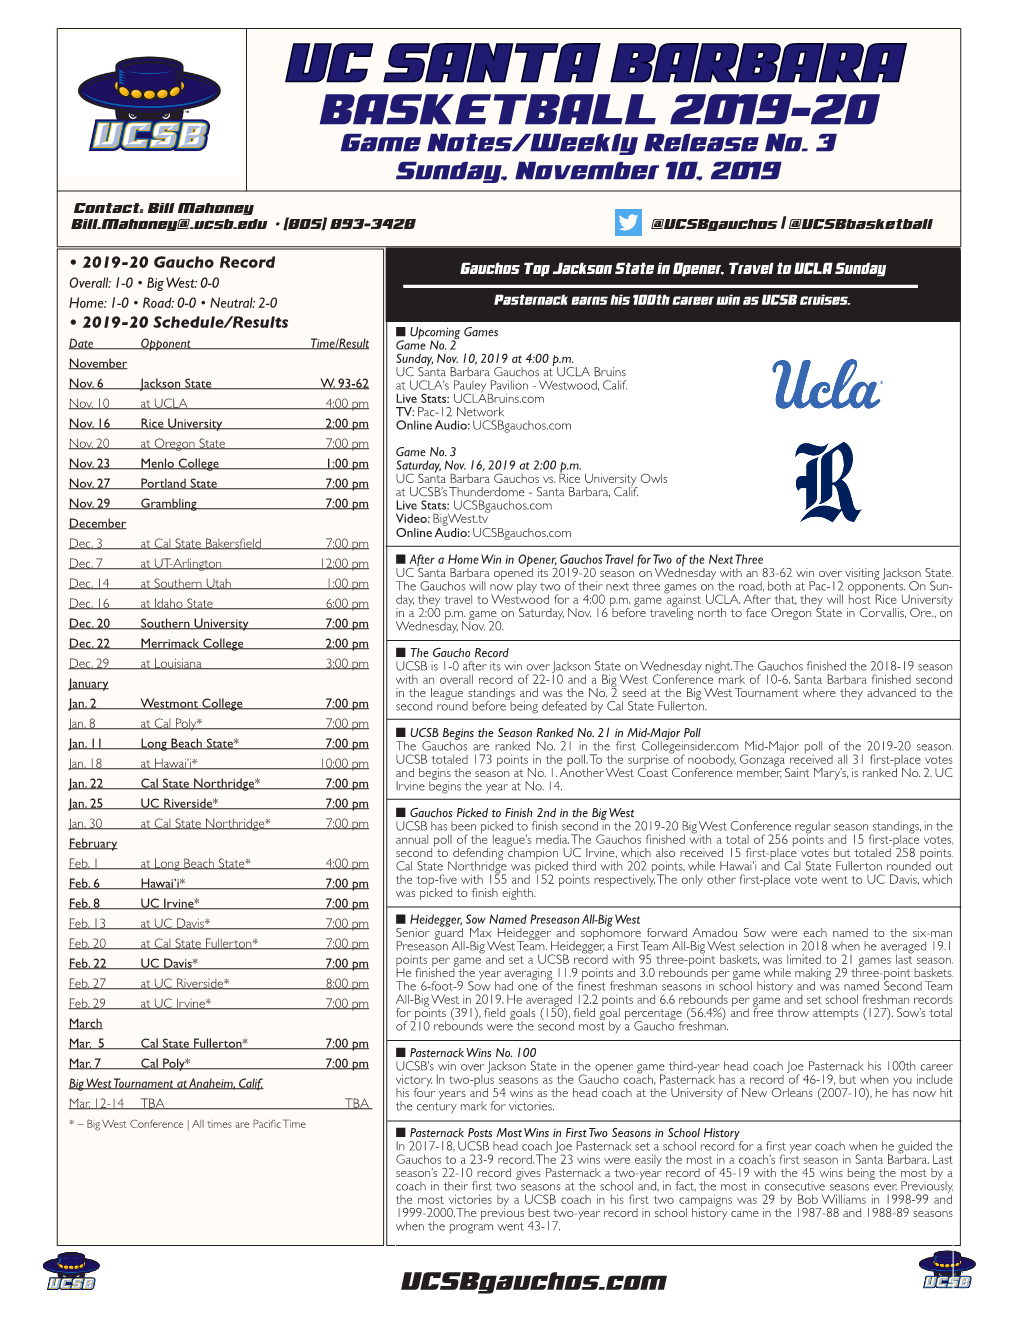 BASKETBALL 2019-20 Game Notes/Weekly Release No